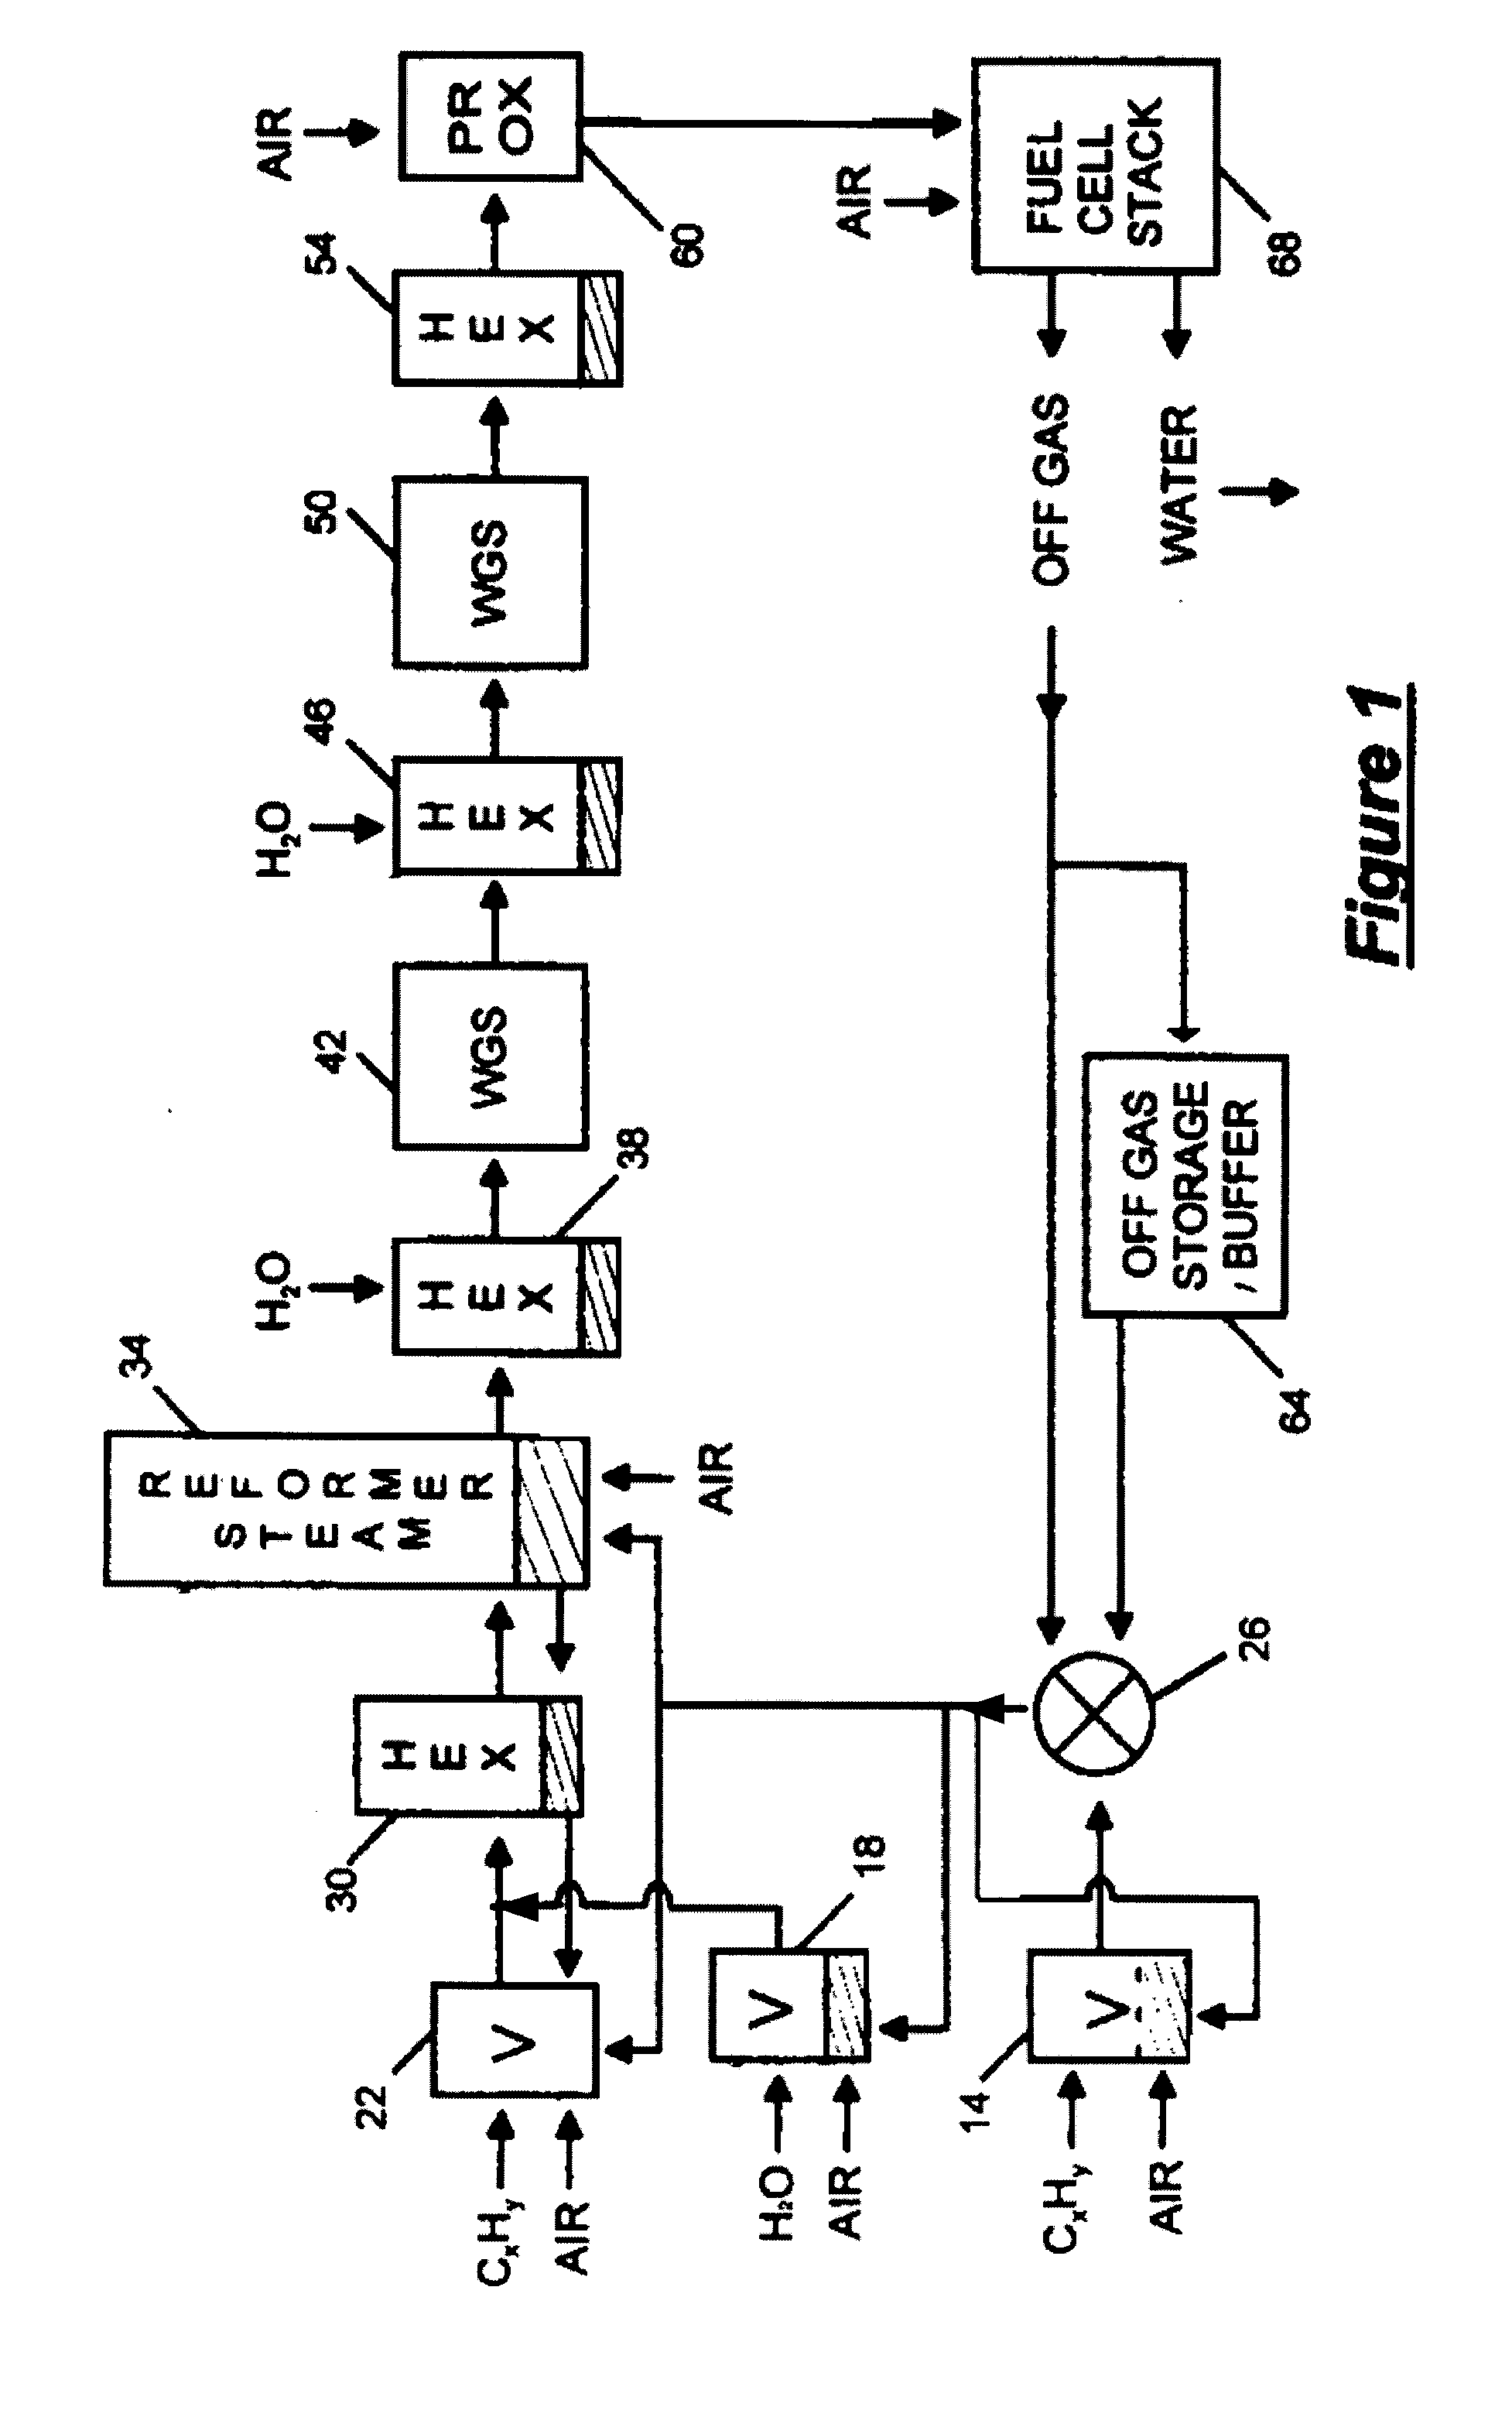 Micro component liquid hydrocarbon steam reformer system and cycle for producing hydrogen gas